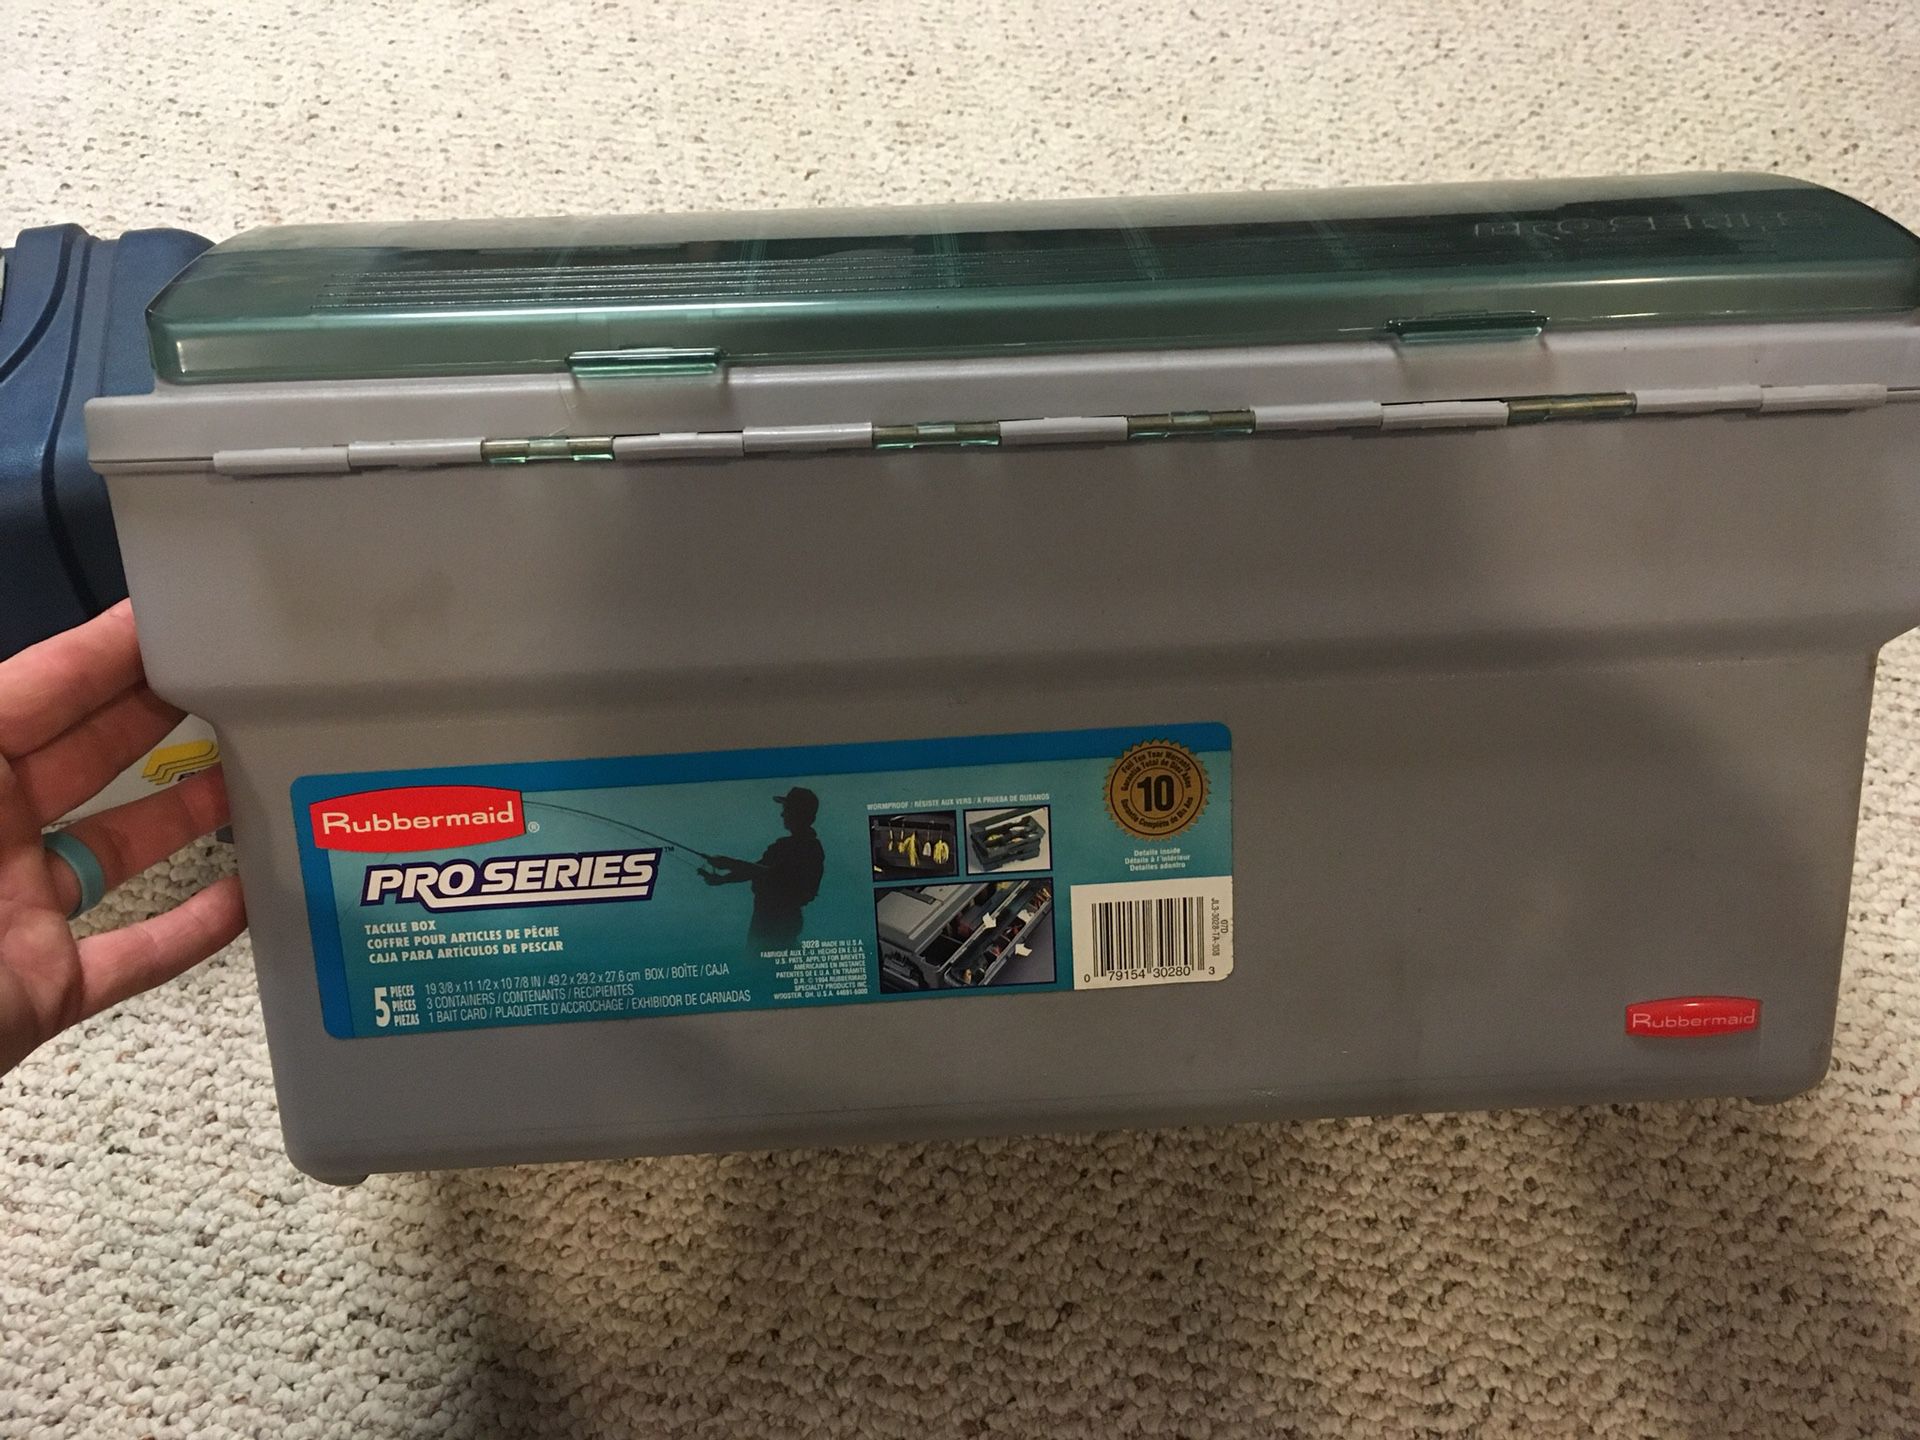 Large Rubbermaid Tackle Box - Brand New for Sale in Valencia, PA - OfferUp